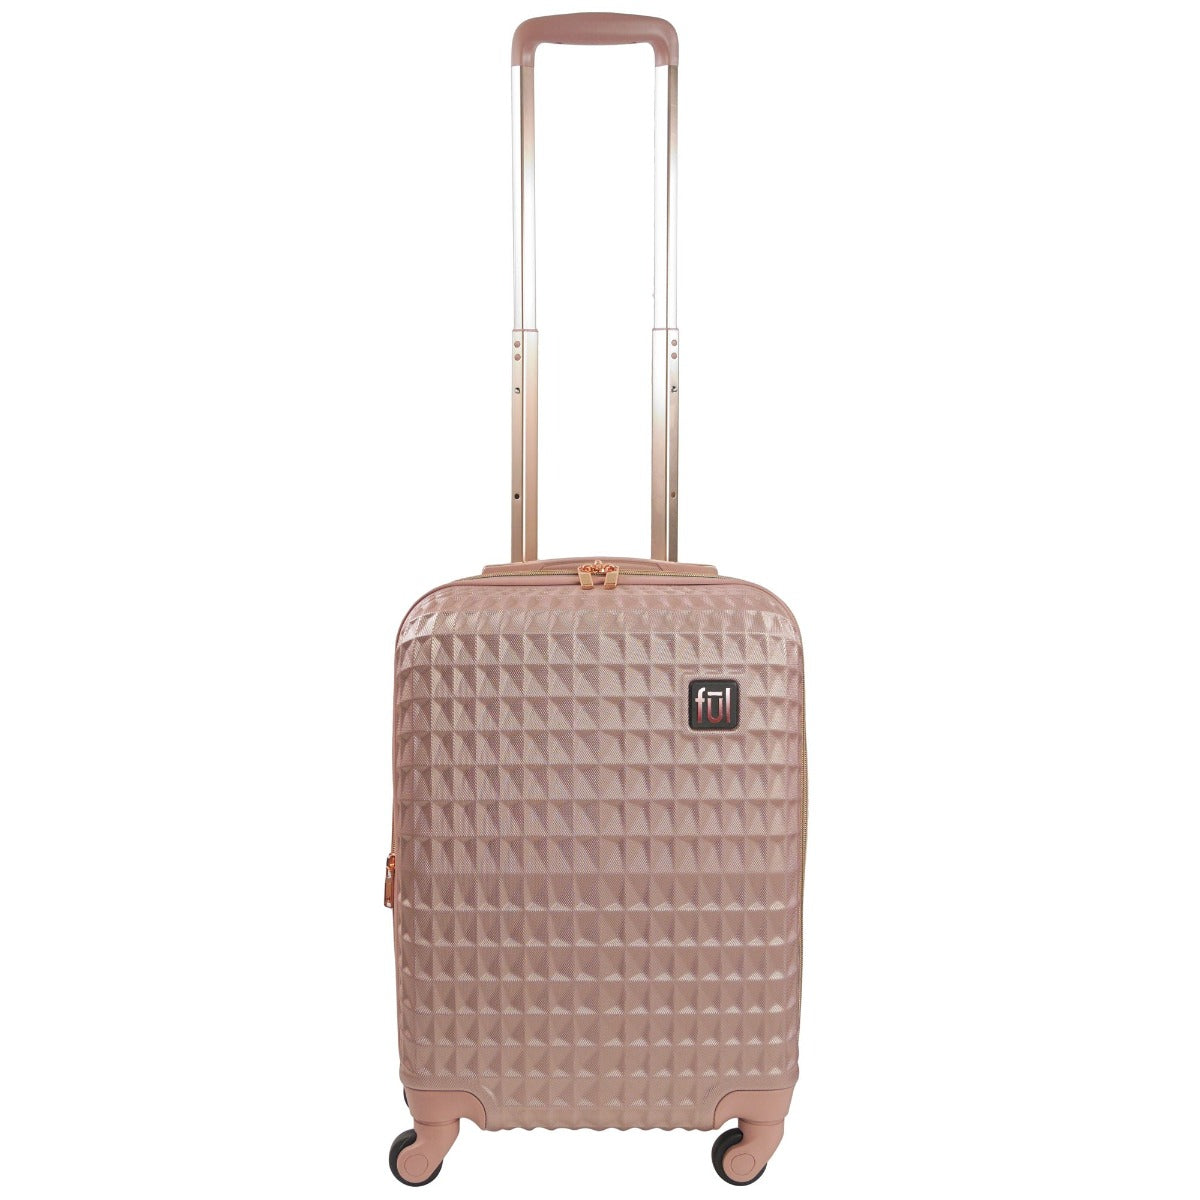 Ful Geo 22 inch carry on hard sided expandable spinner suitcase rose gold luggage